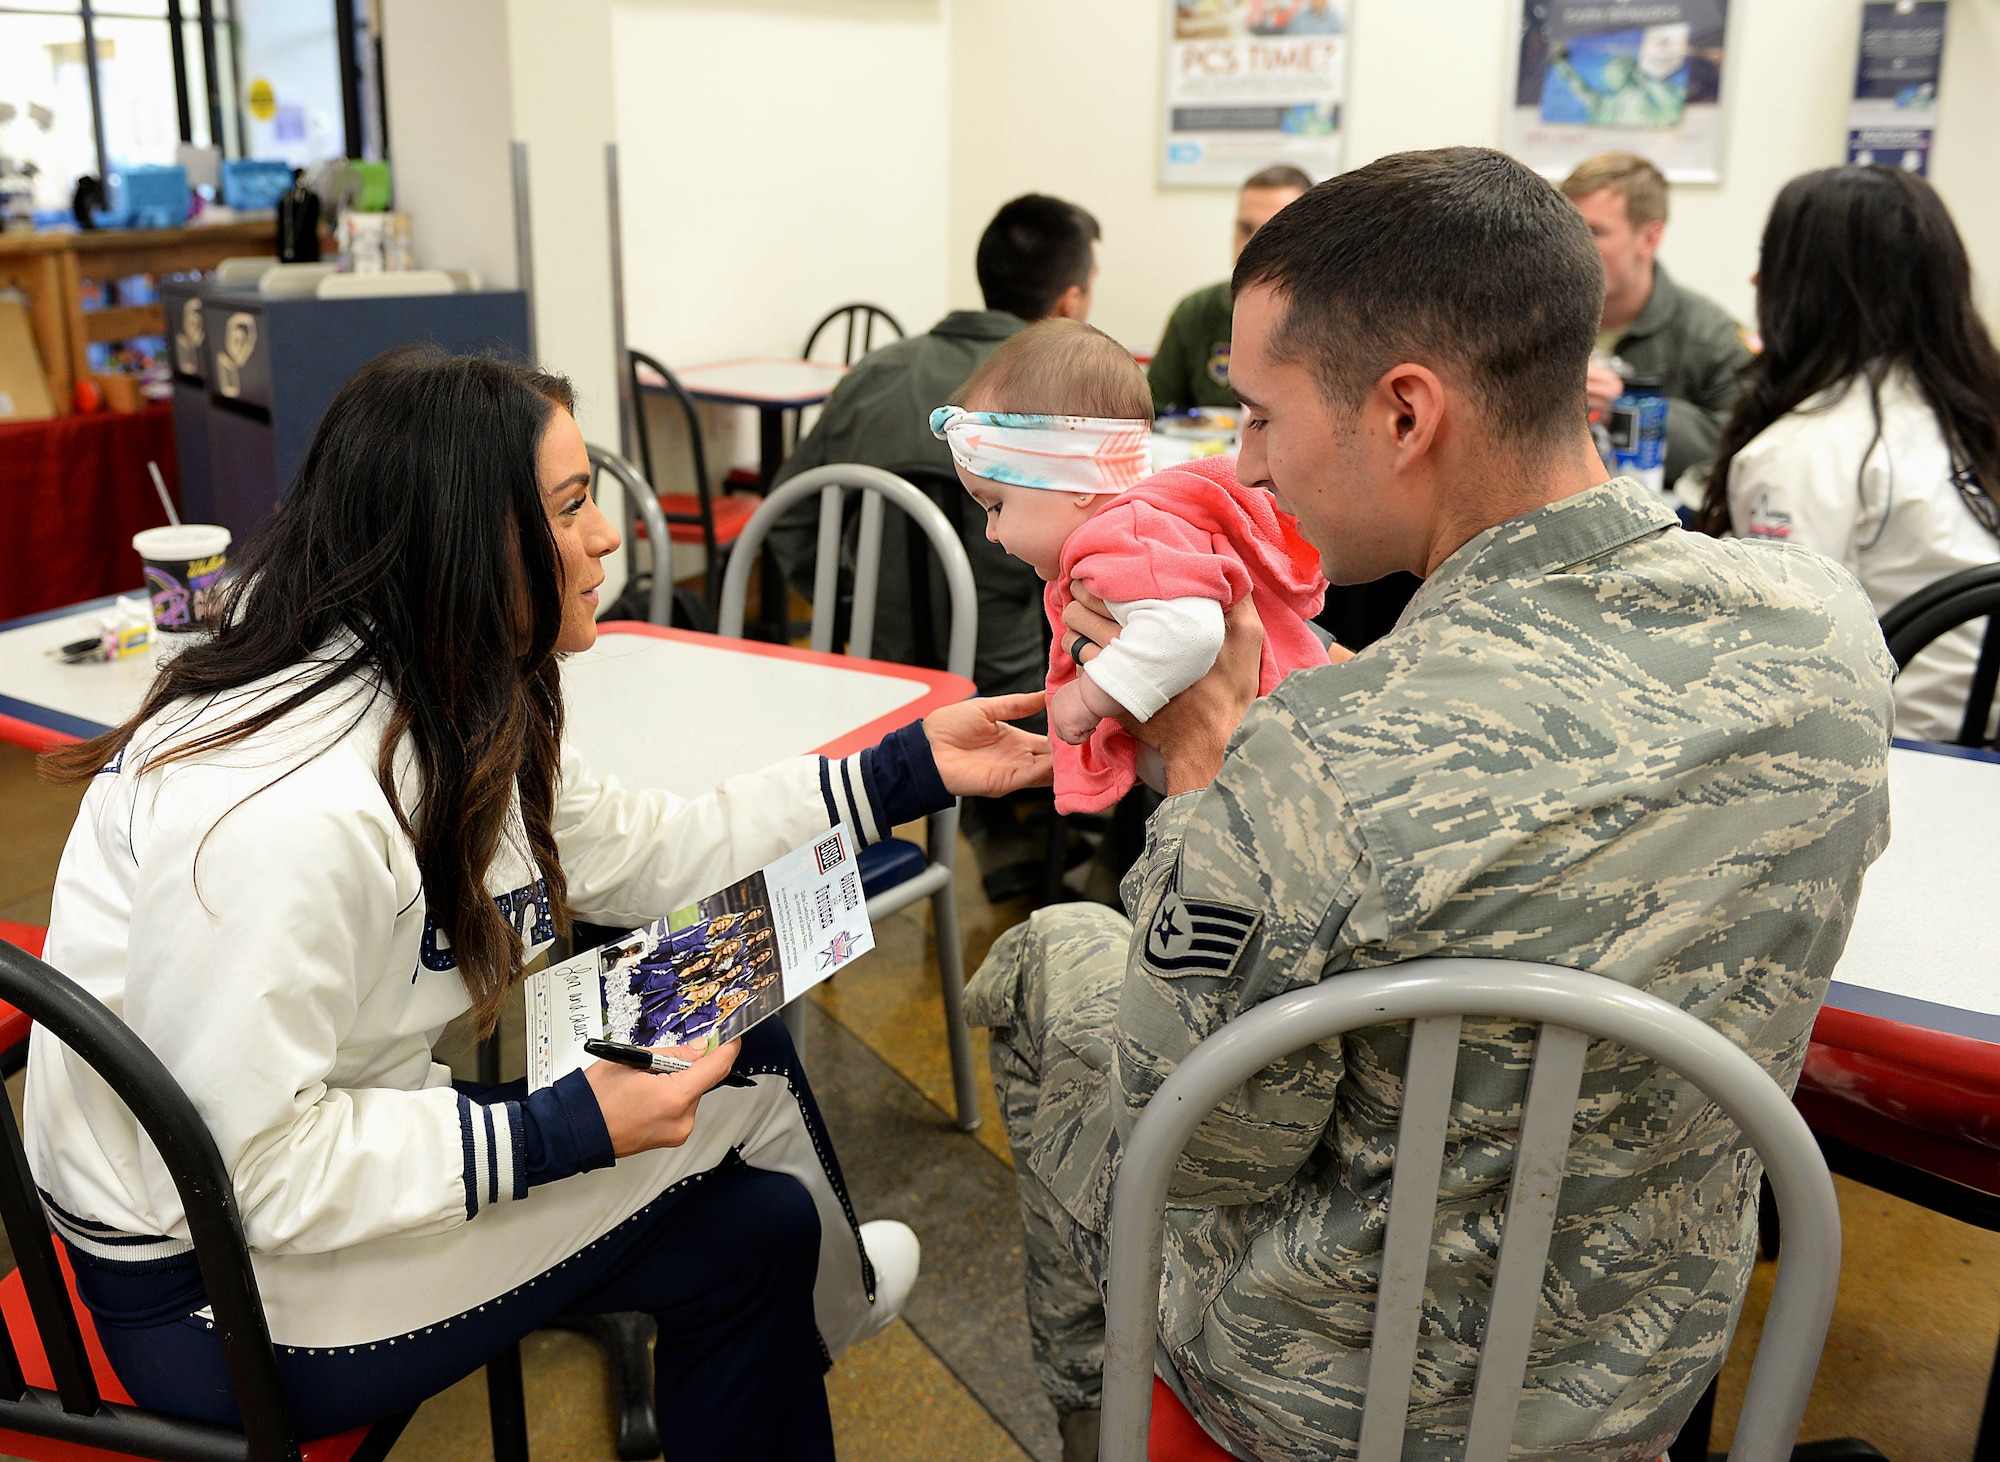 Staff Sgt. Zachary Kunkler, 14th Security Forces Squadron Military Working Dog handler, and his daughter, Emrie, speak with Kelsey, Dallas Cowboys Cheerleader, Dec. 4, 2017, at the Exchange on Columbus Air Force Base, Mississippi. The cheerleaders met with Airmen and their families throughout the day. (U.S. Air Force photo by Airman 1st Class Keith Holcomb)